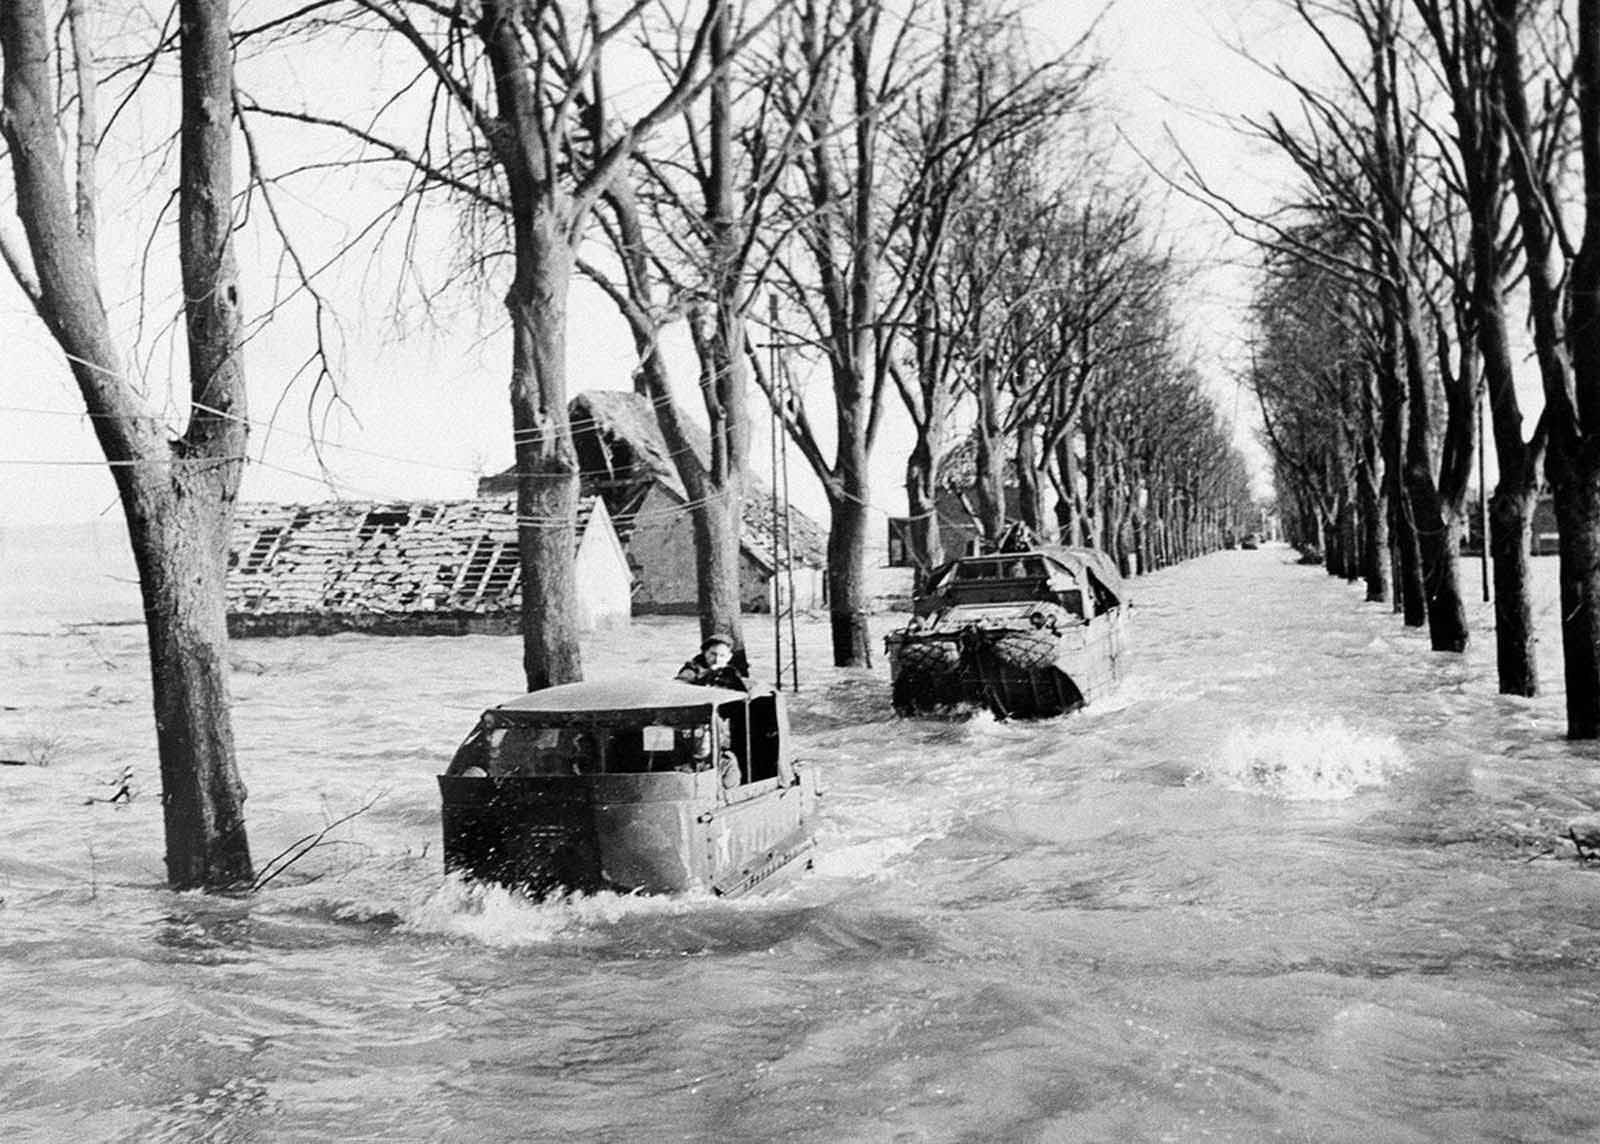 A party sets out to repair telephone lines on the main road in Kranenburg on February 22, 1945, amid four-foot deep floods caused by the bursting of Dikes by the retreating Germans. During the floods, British troops further into Germany have had their supplies brought by amphibious vehicles.